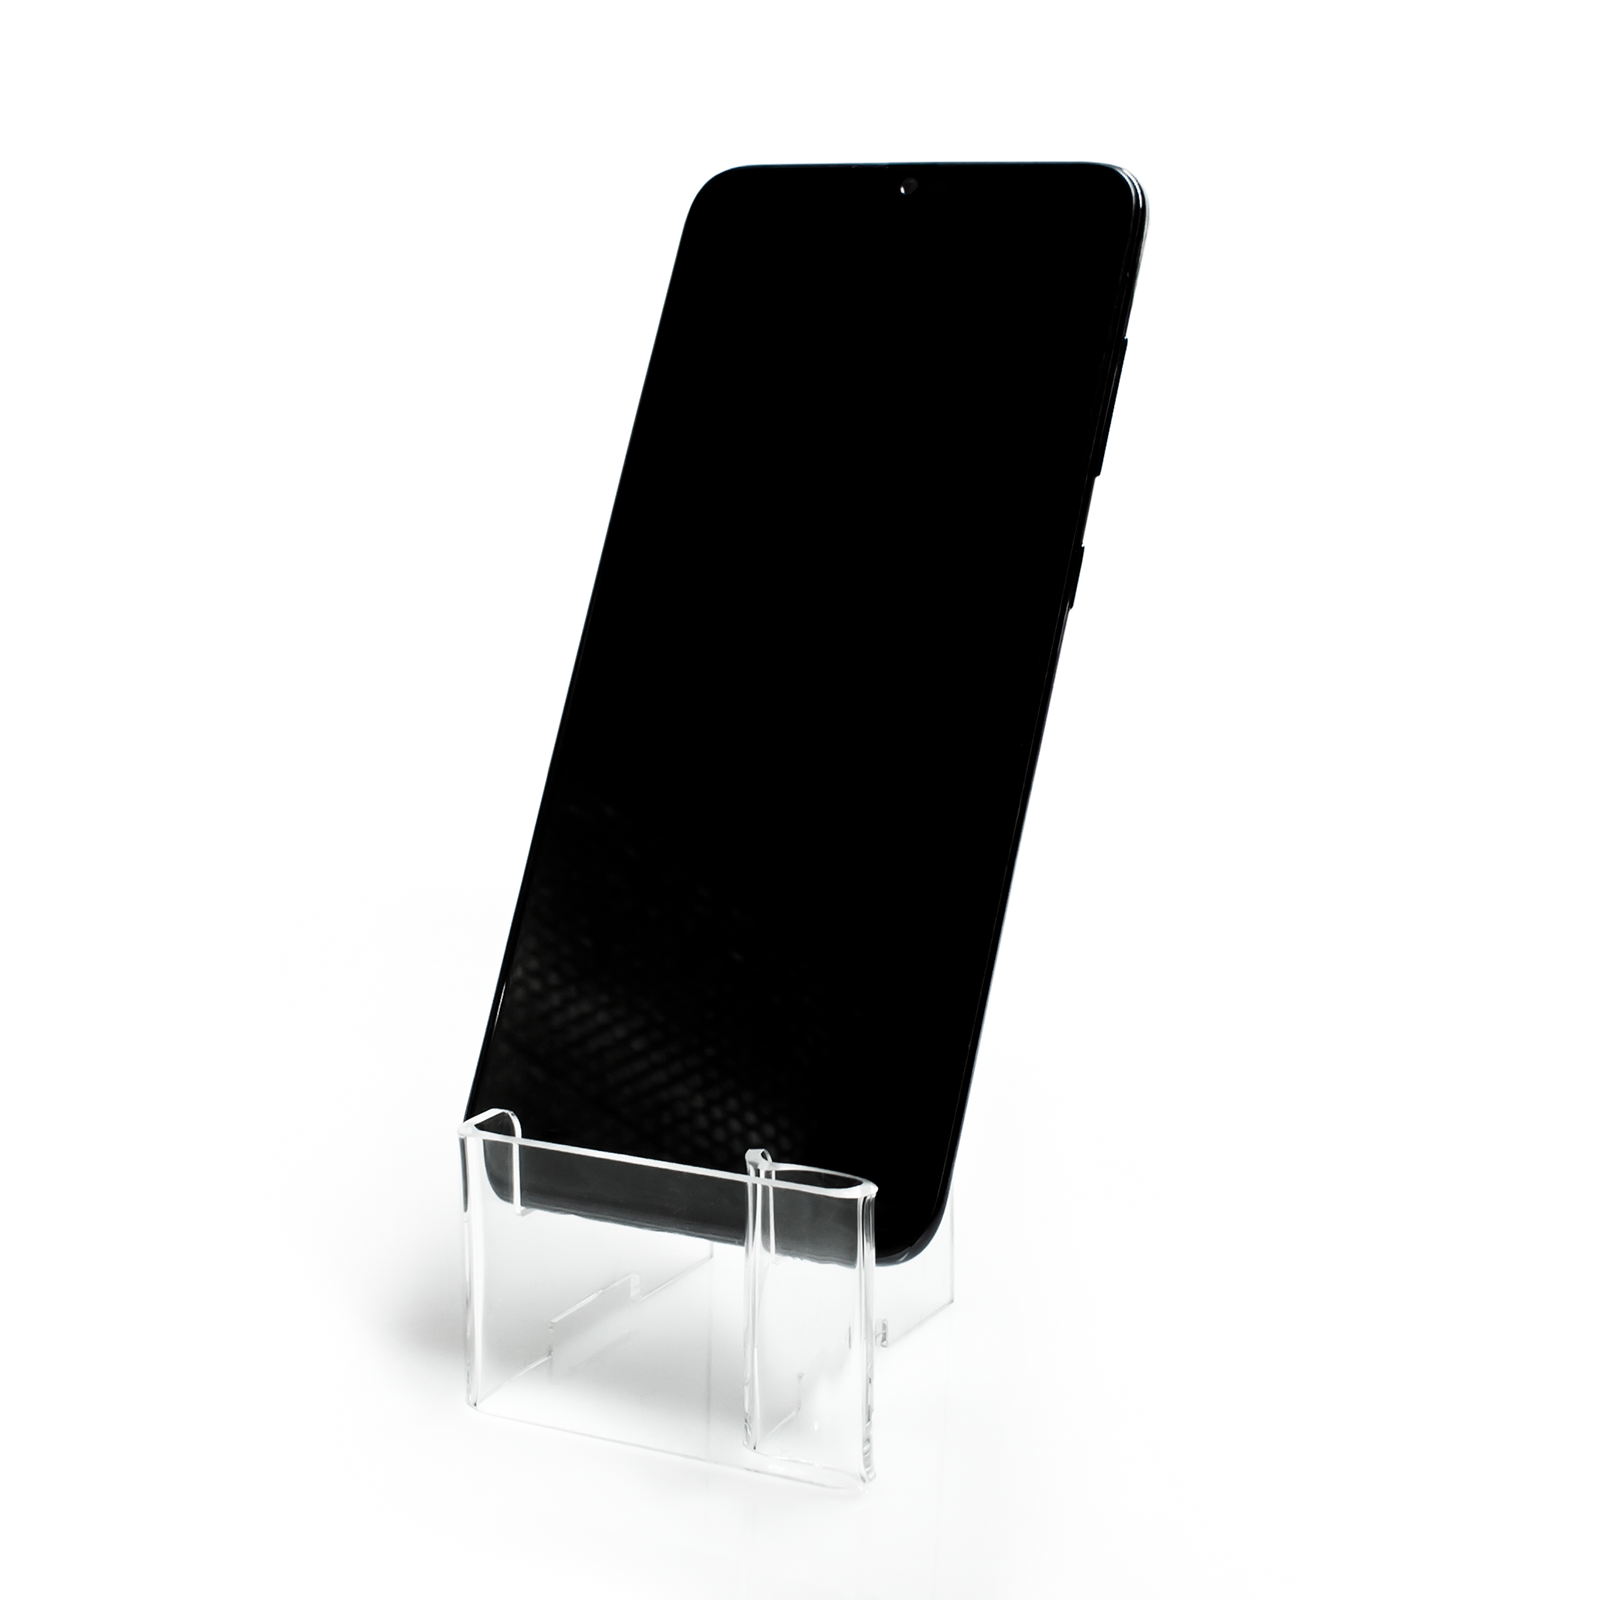 Acrylic Mobile Phone Point of Sale Display (DSL4/1)